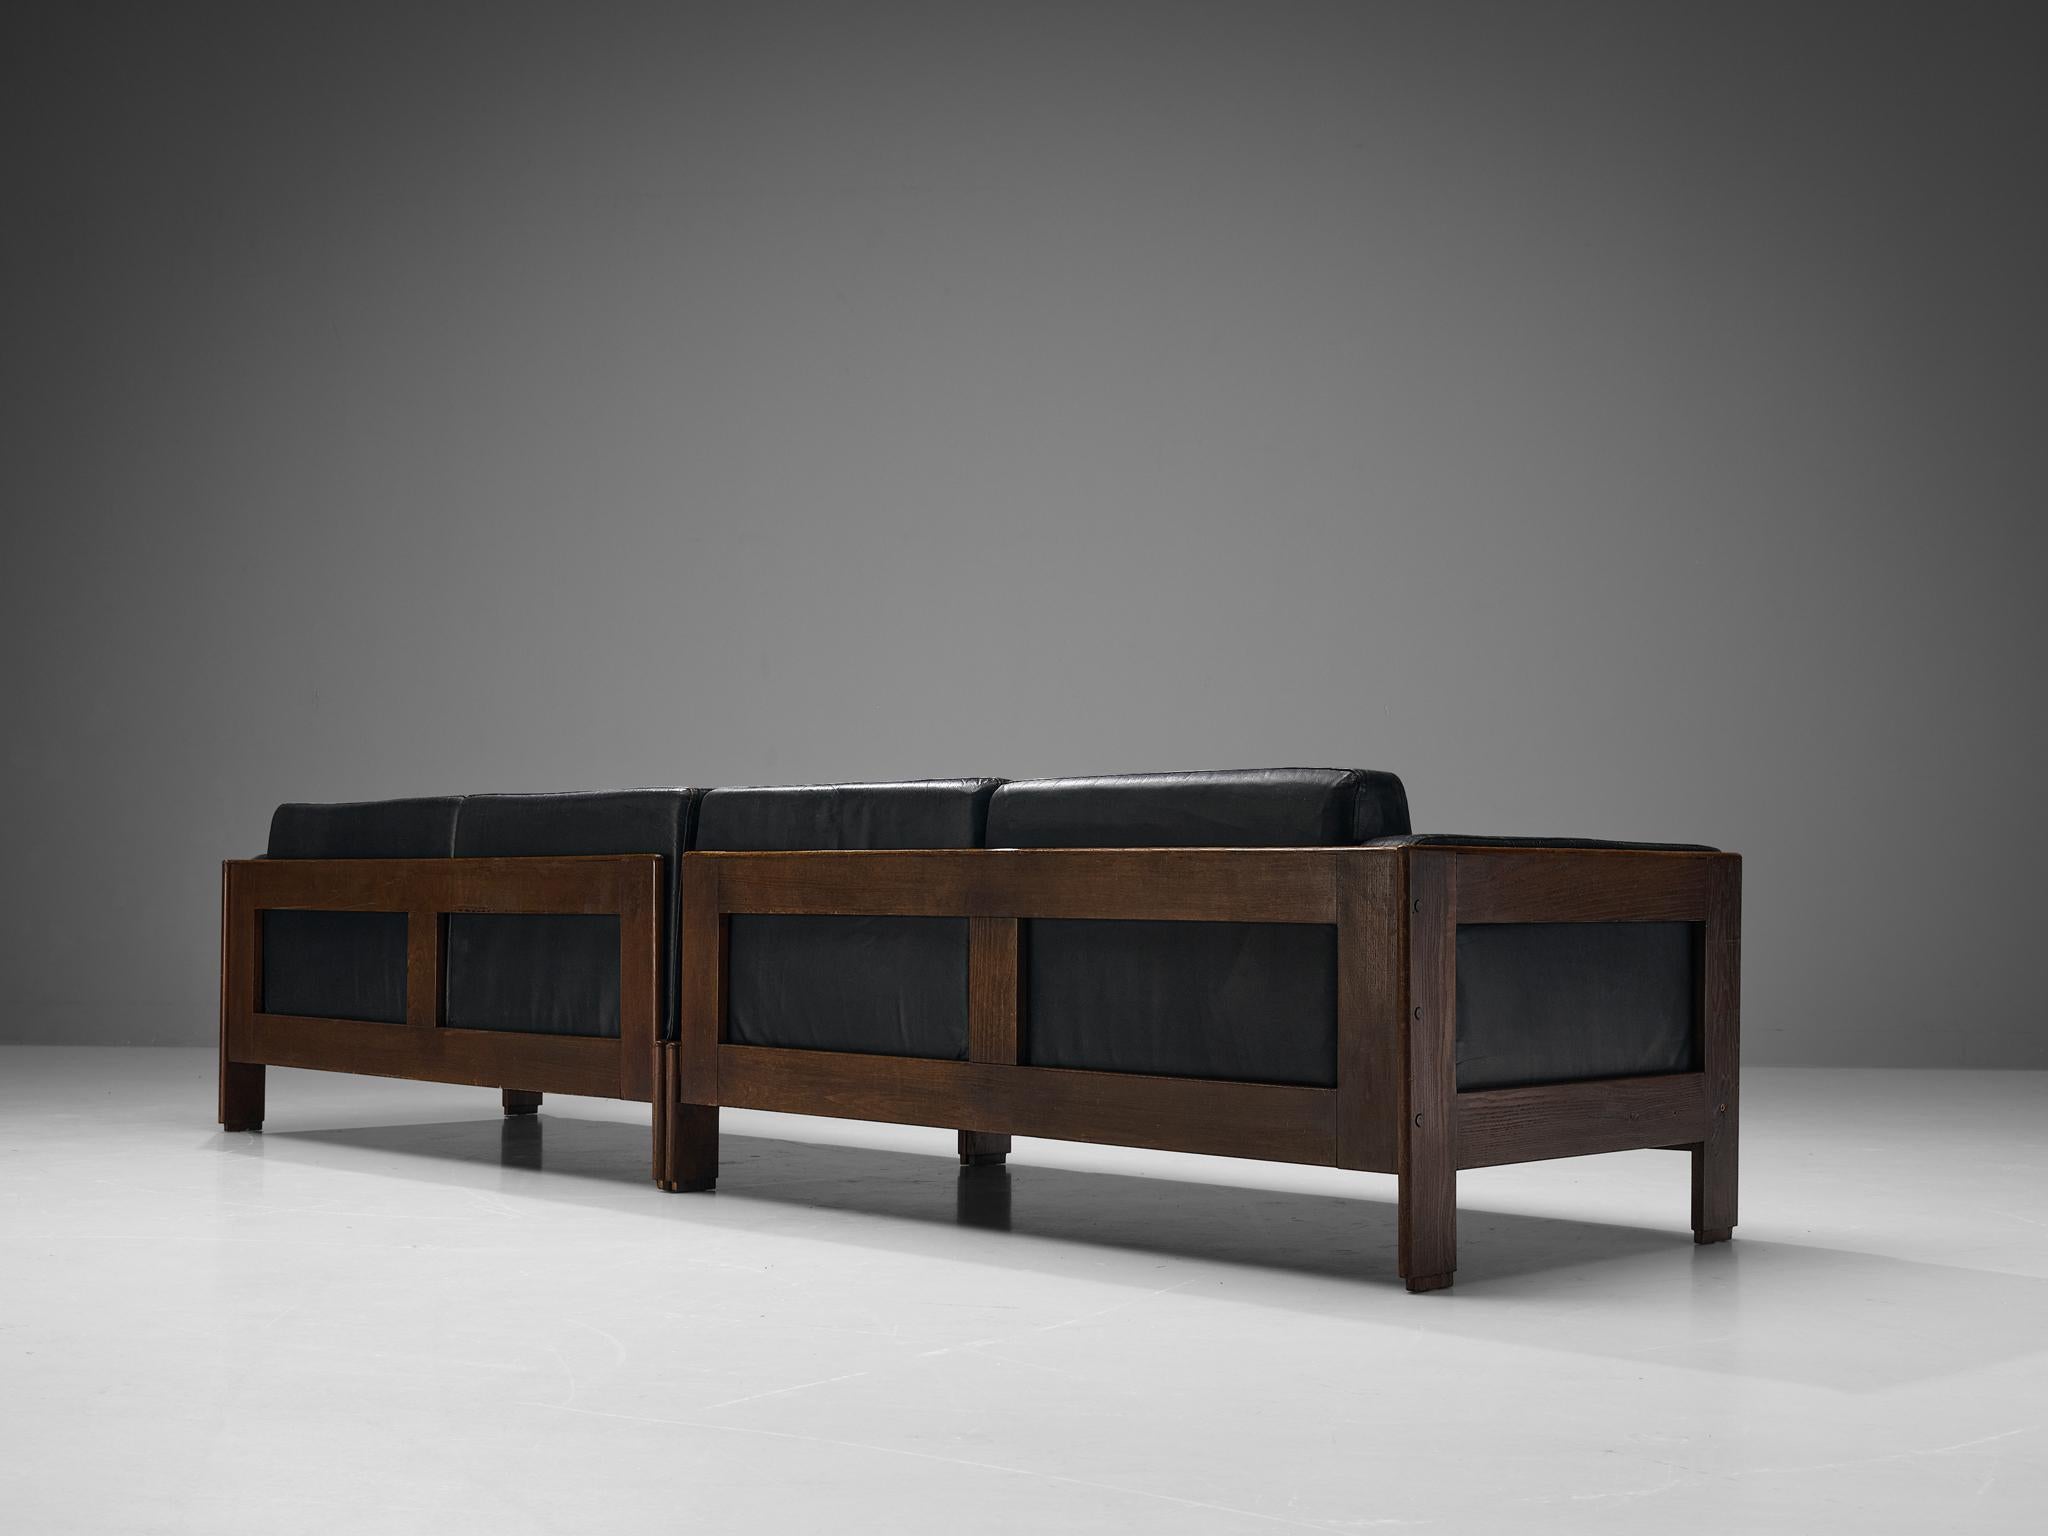 Four seat sofa, ash, patinated Leather, Europe, 1970s. 

Beautiful four seater sofa made with an ash frame and black leather upholstery. Its design strongly resembles the Bastiano sofa designed by Afra & Tobia Scarpa for Gavina in the sixties. The